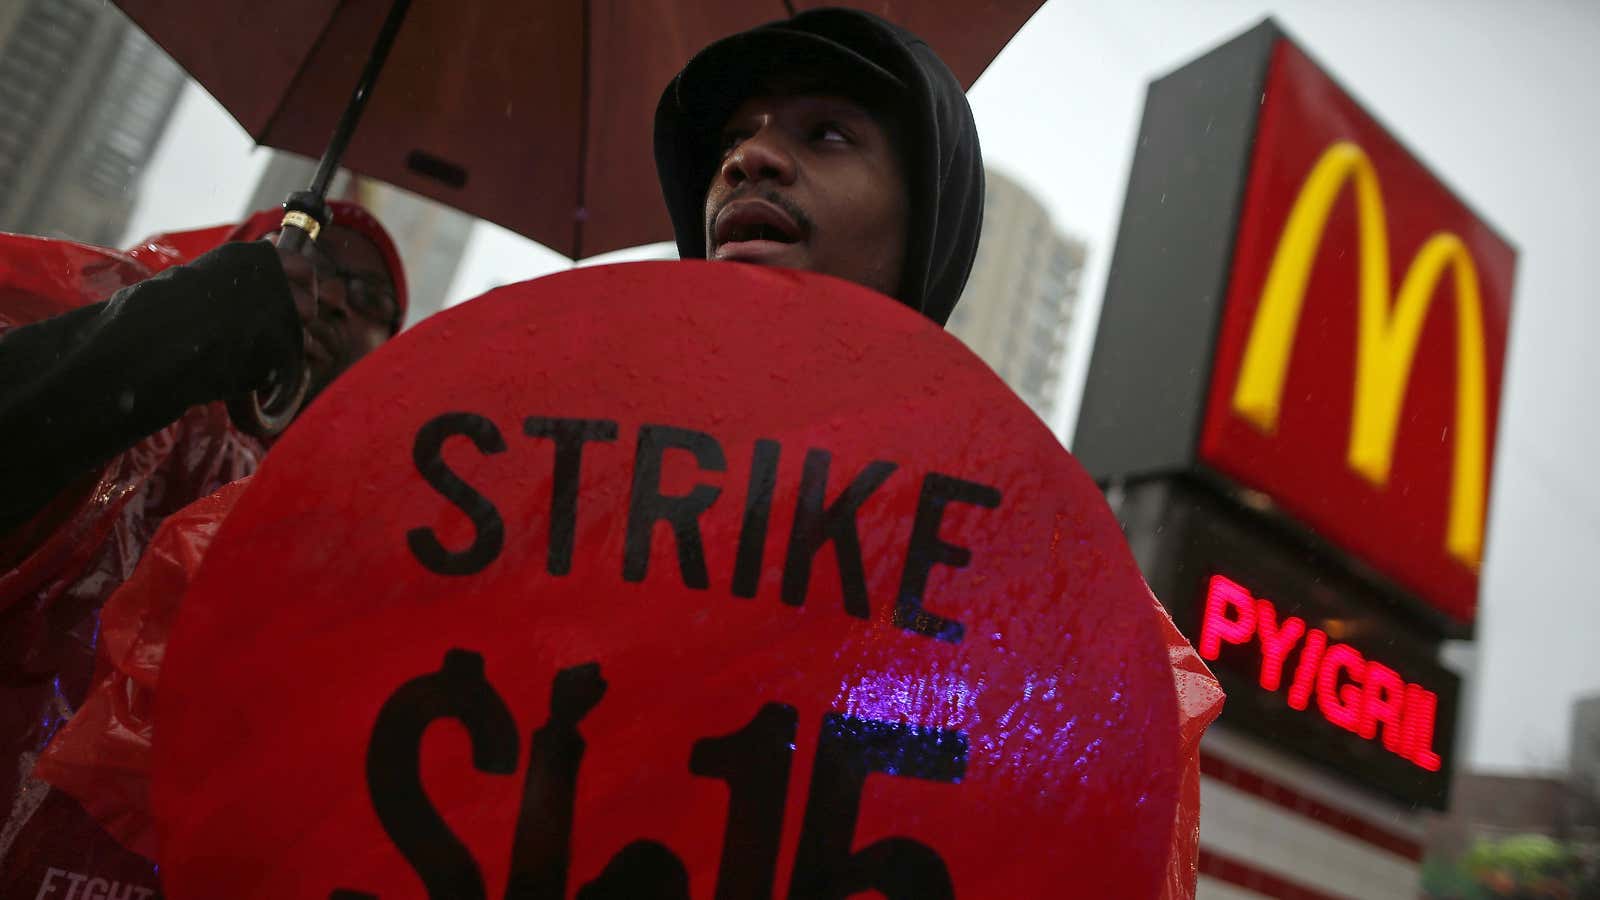 Demonstrators protest for higher wages in front of a McDonald’s restaurant in Chicago.